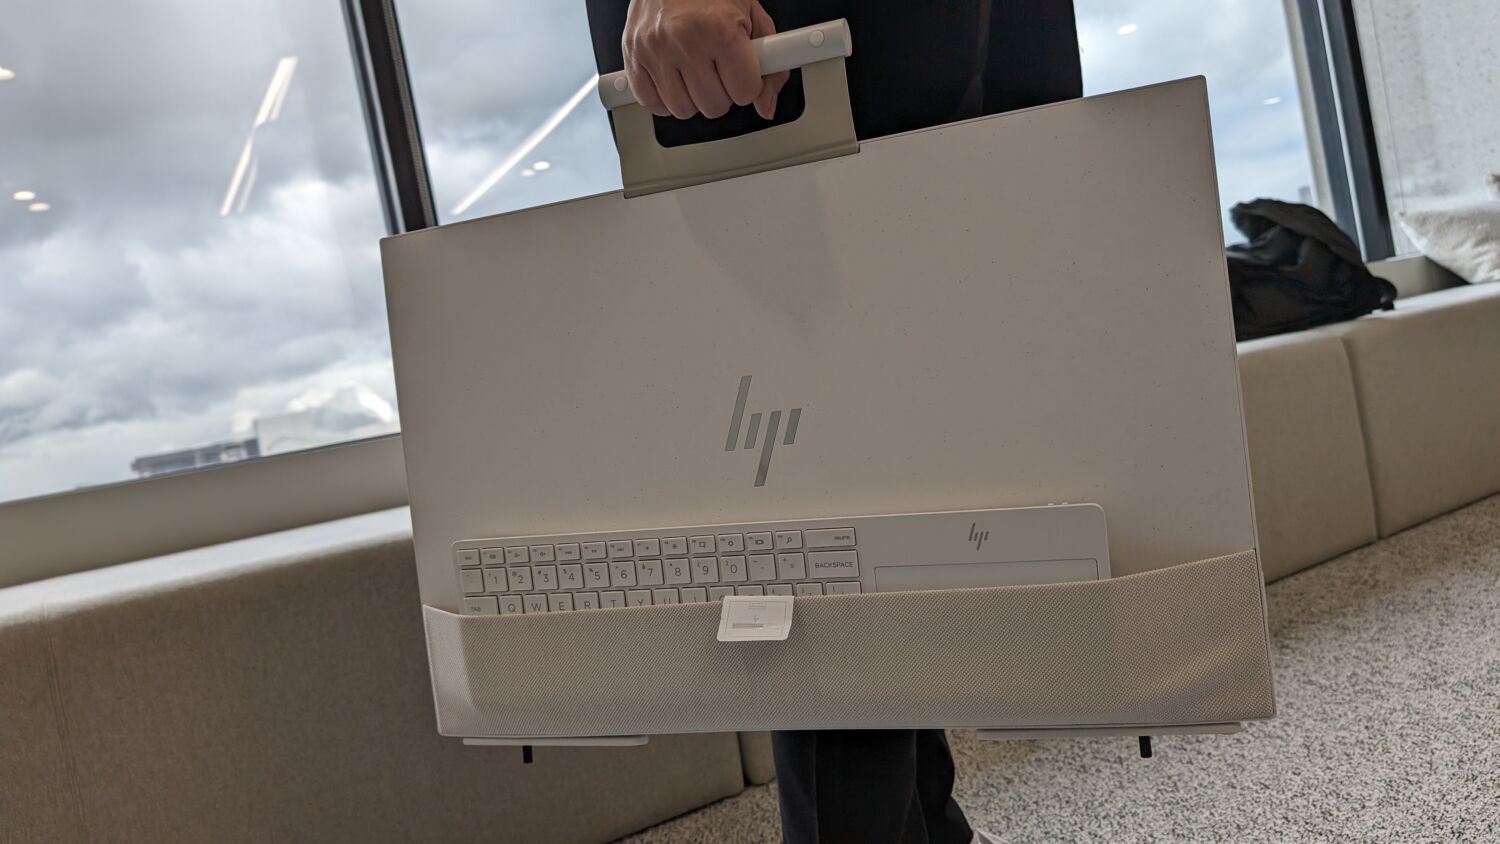 HP’s Envy Move blends laptops and PCs into a single device